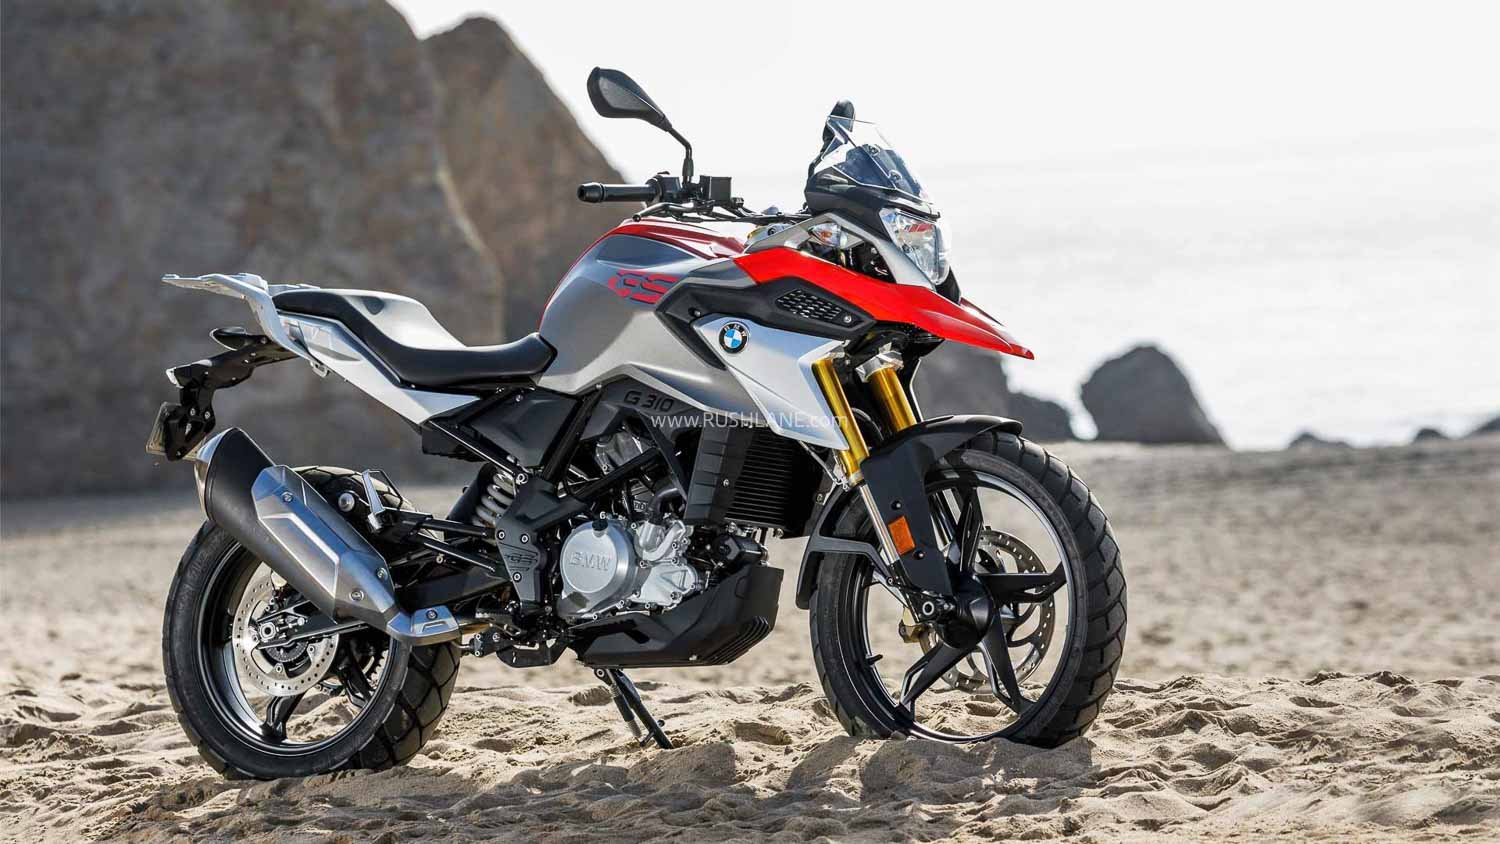 Bs6 Bmw G310 R G310 Gs Prices To Be Cut By Rs 75k